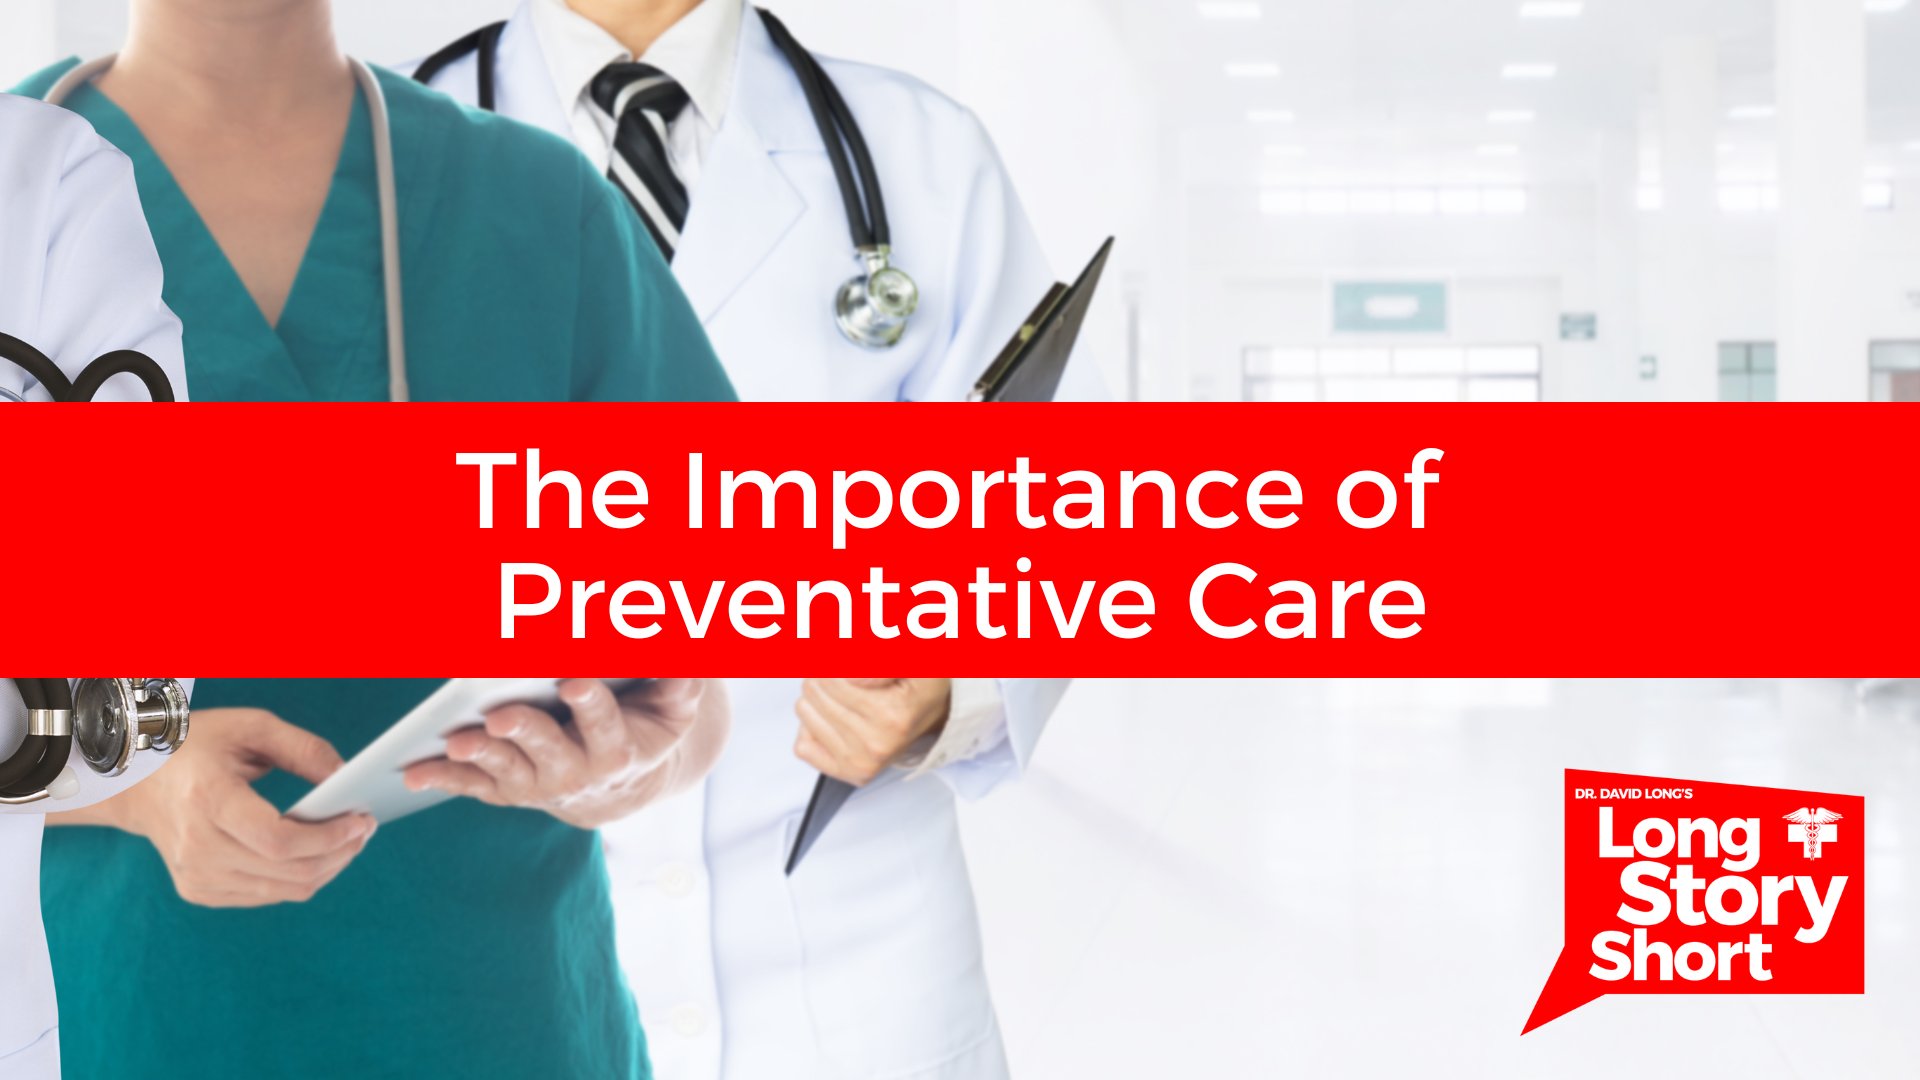 You are currently viewing The Importance of Preventative Care – Dr. David Long